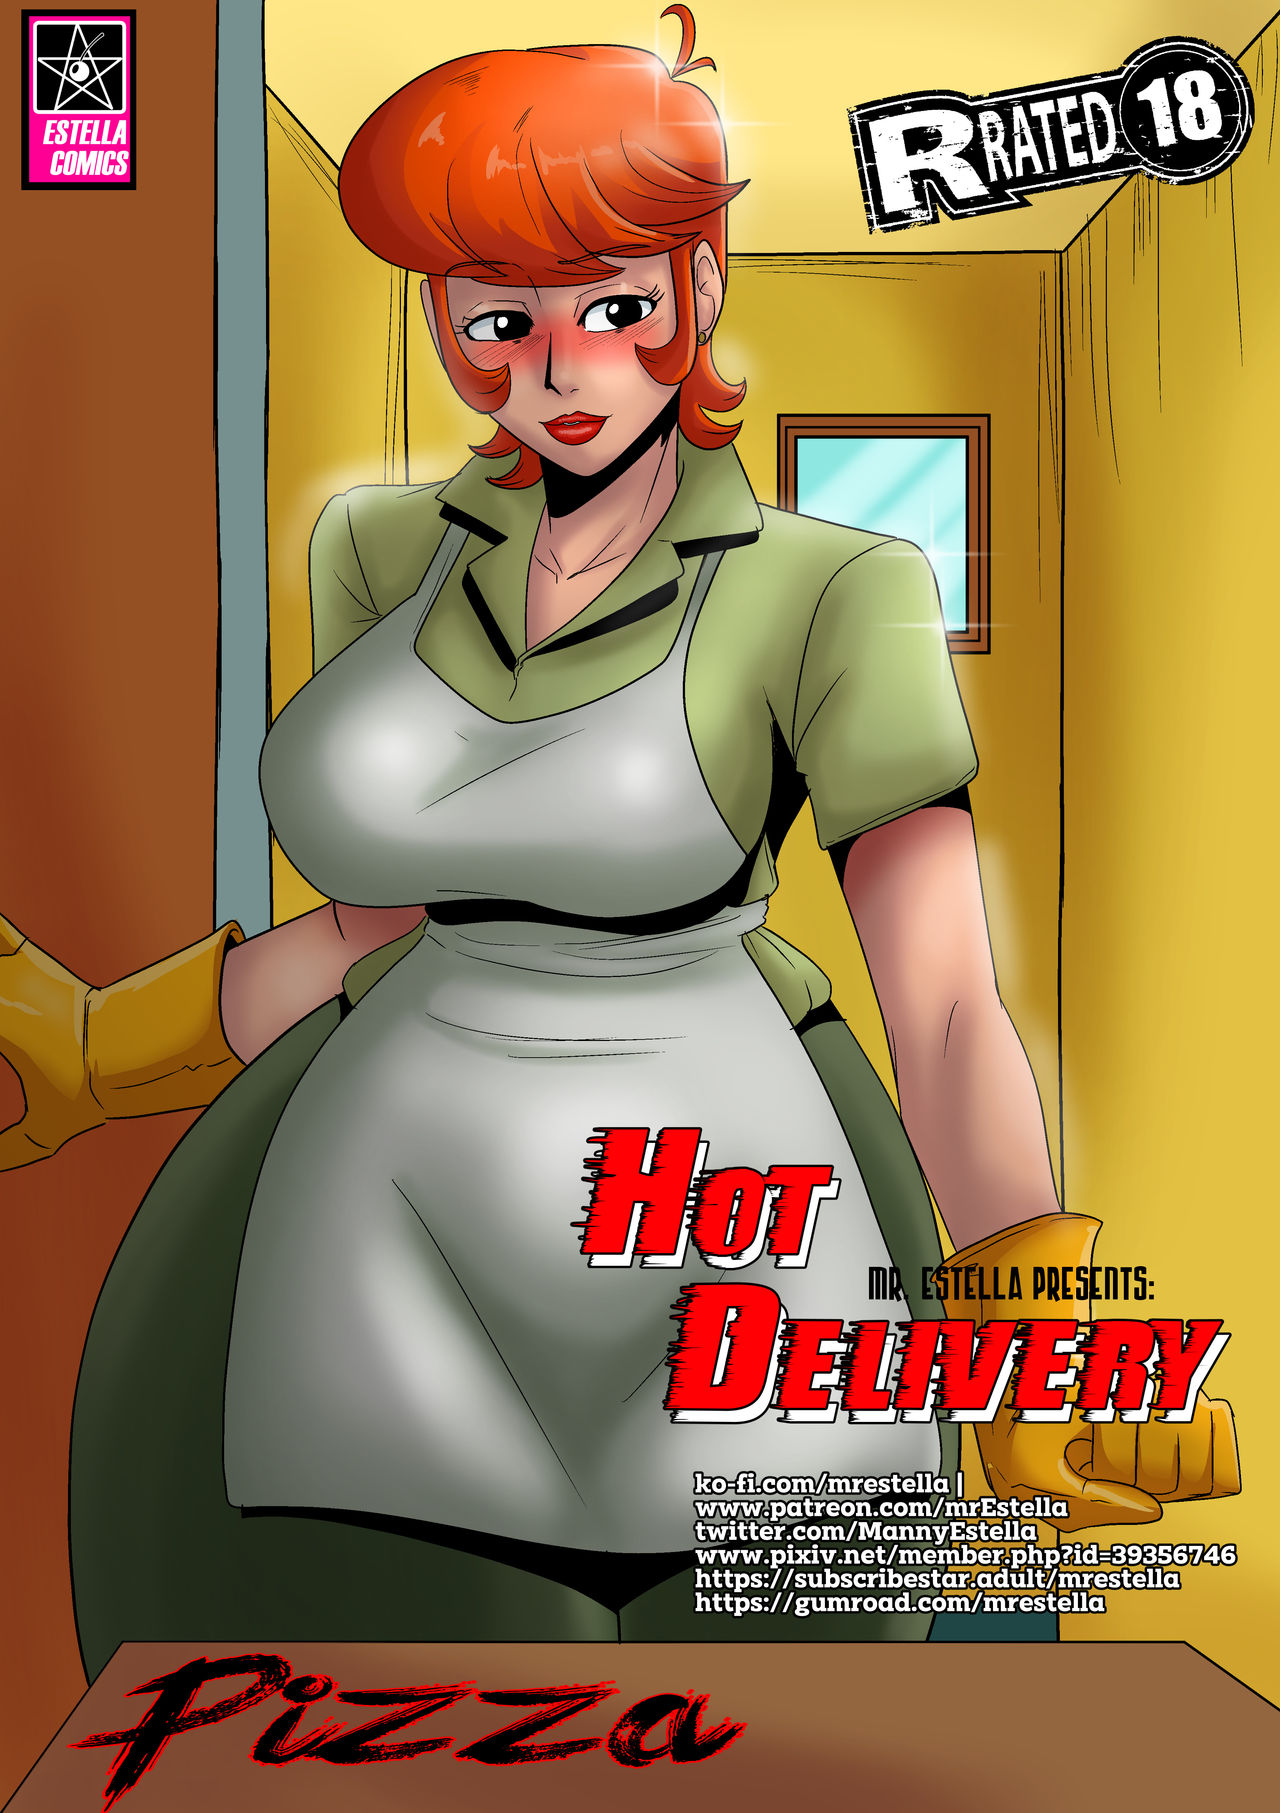 Hot Delivery 01